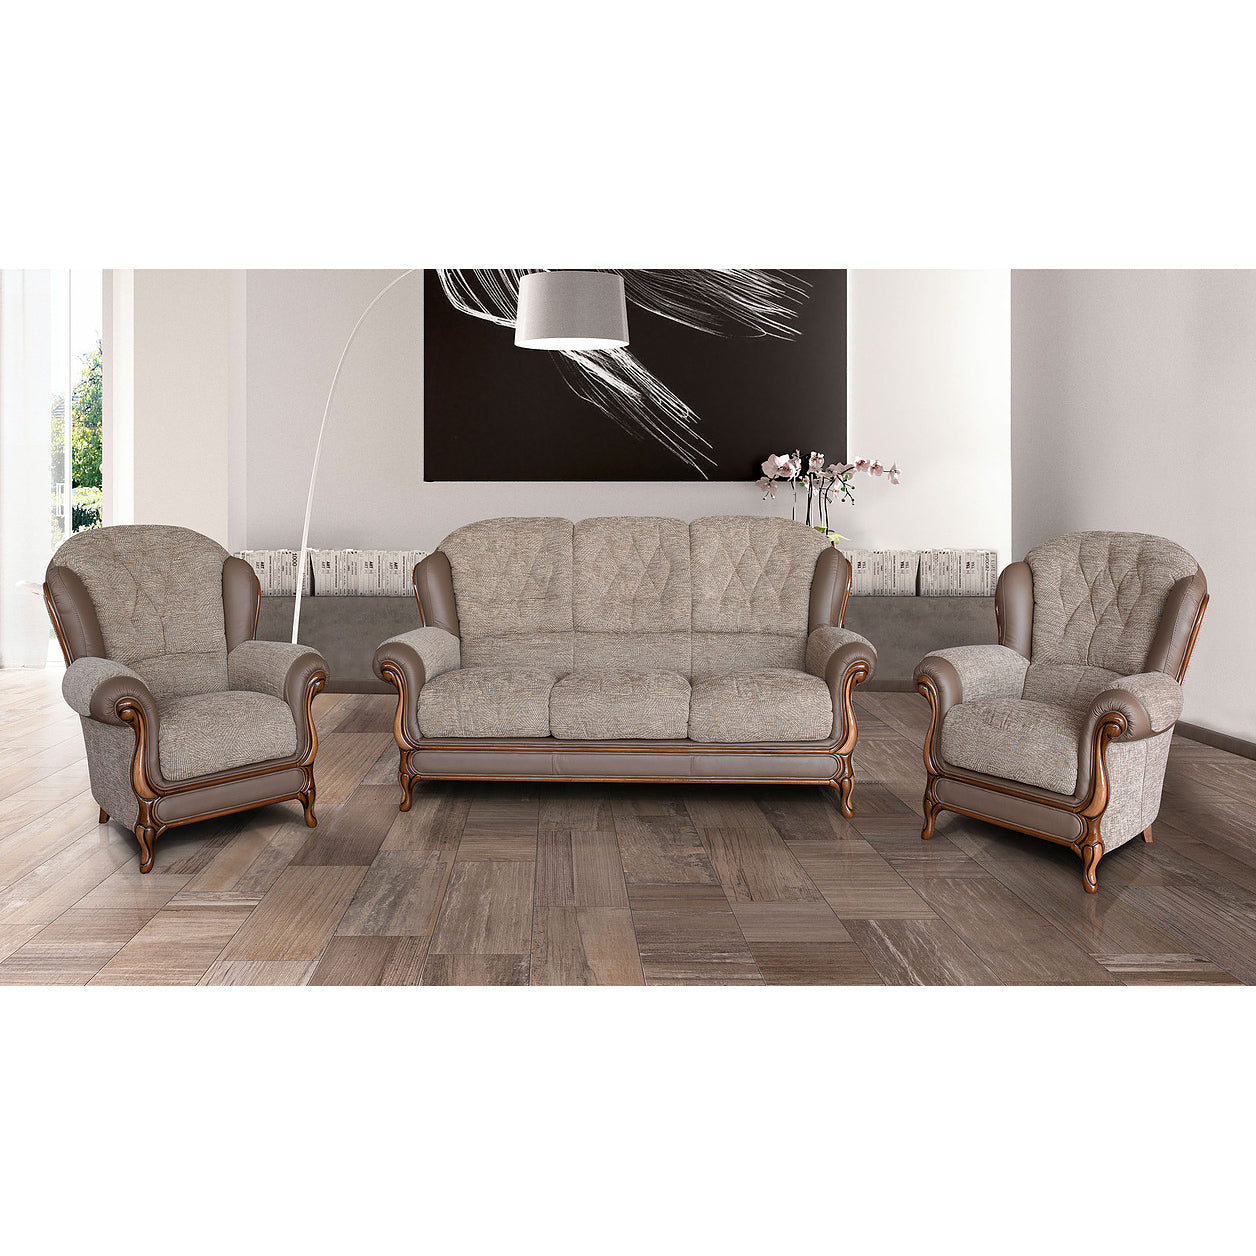 Corby 3 Seater Sofa